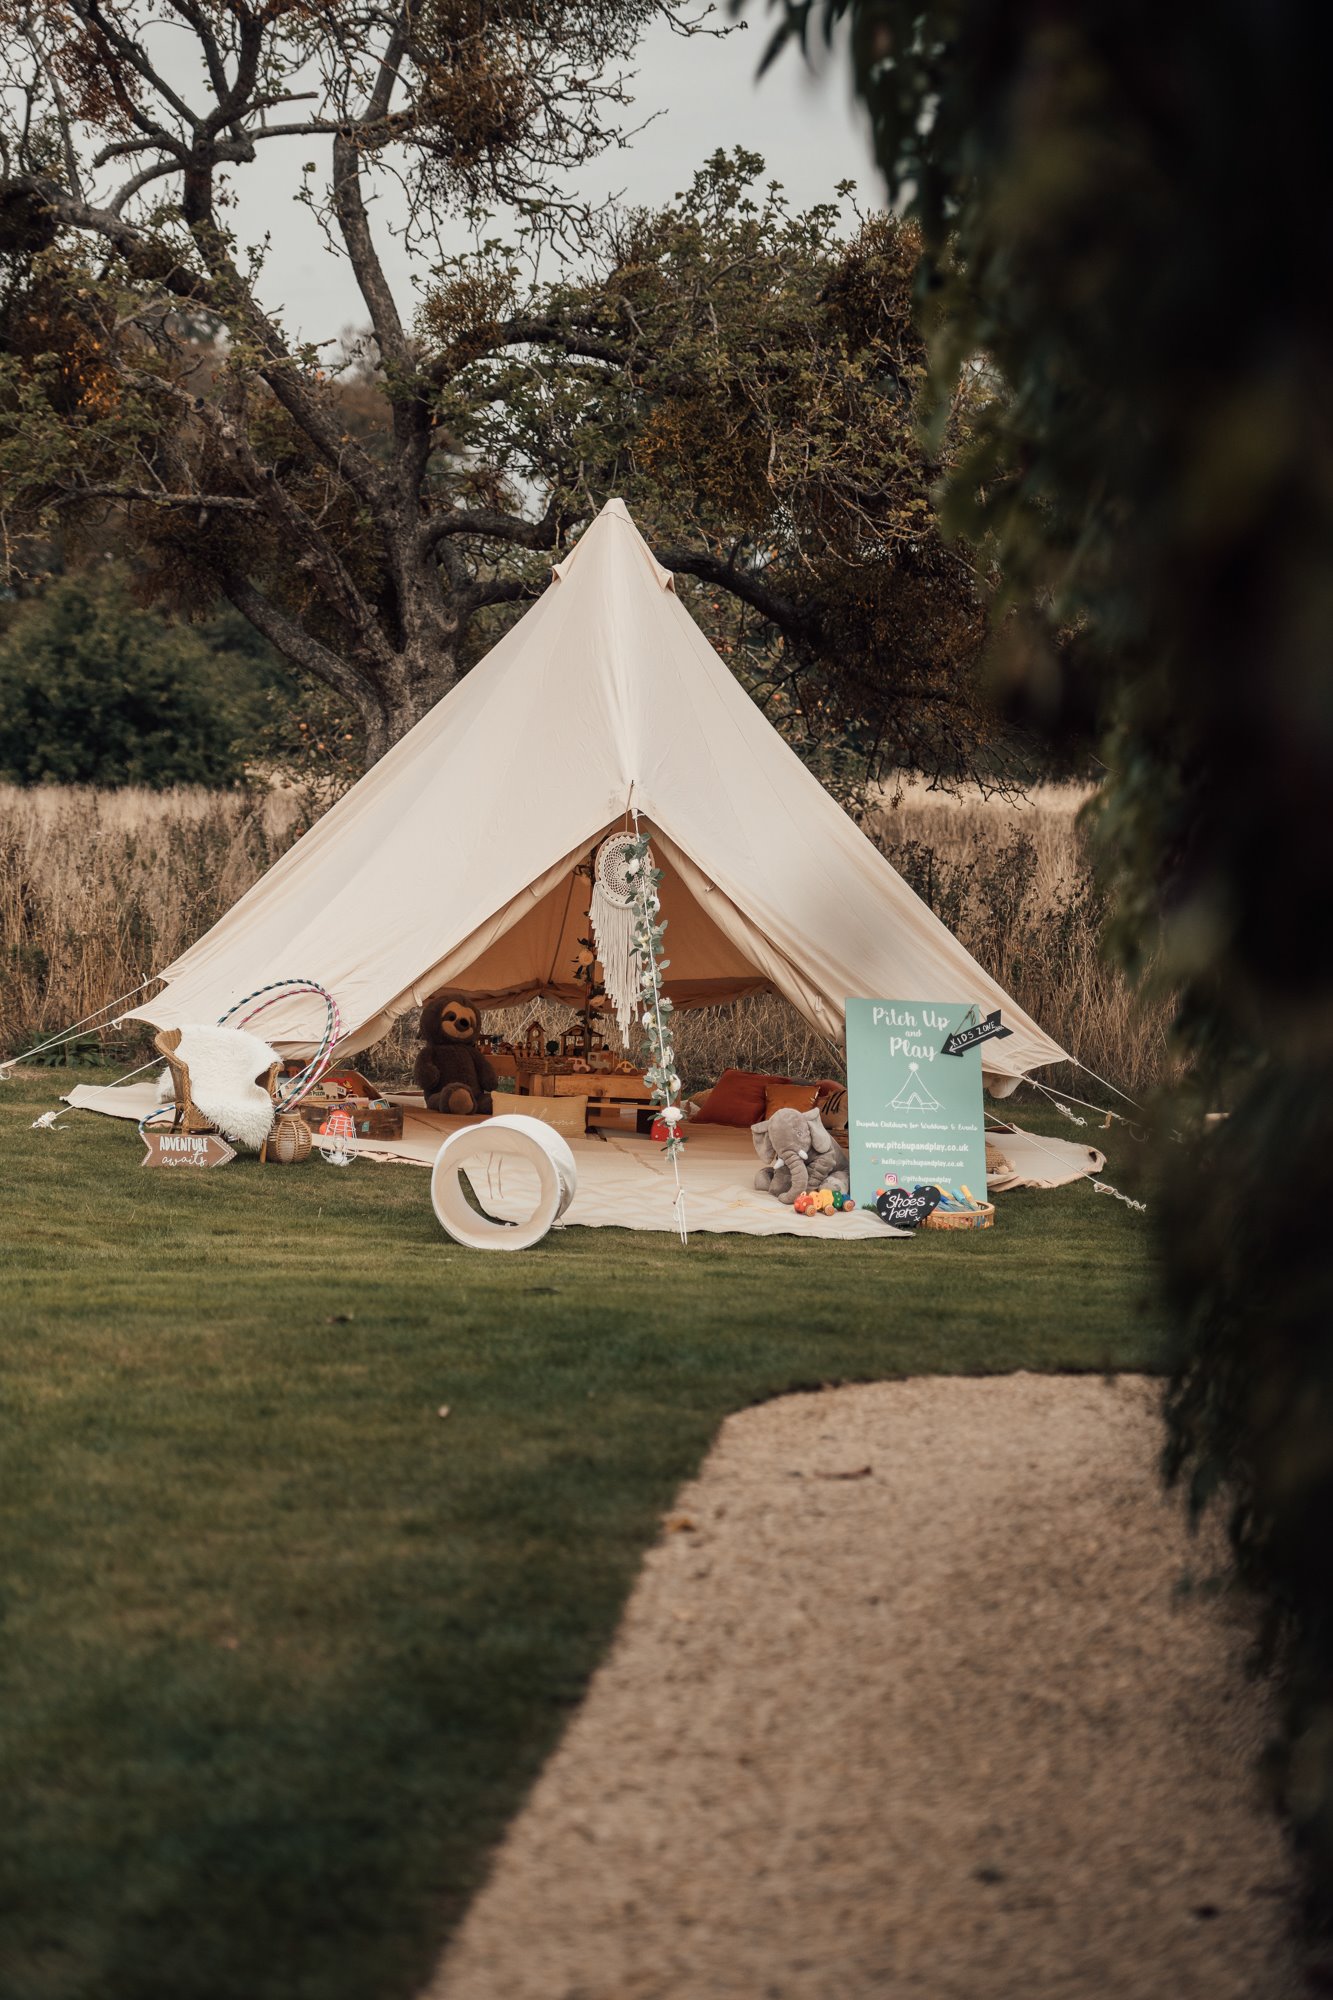 Beautiful play tents and toys from cool wedding childcare pitch up and play